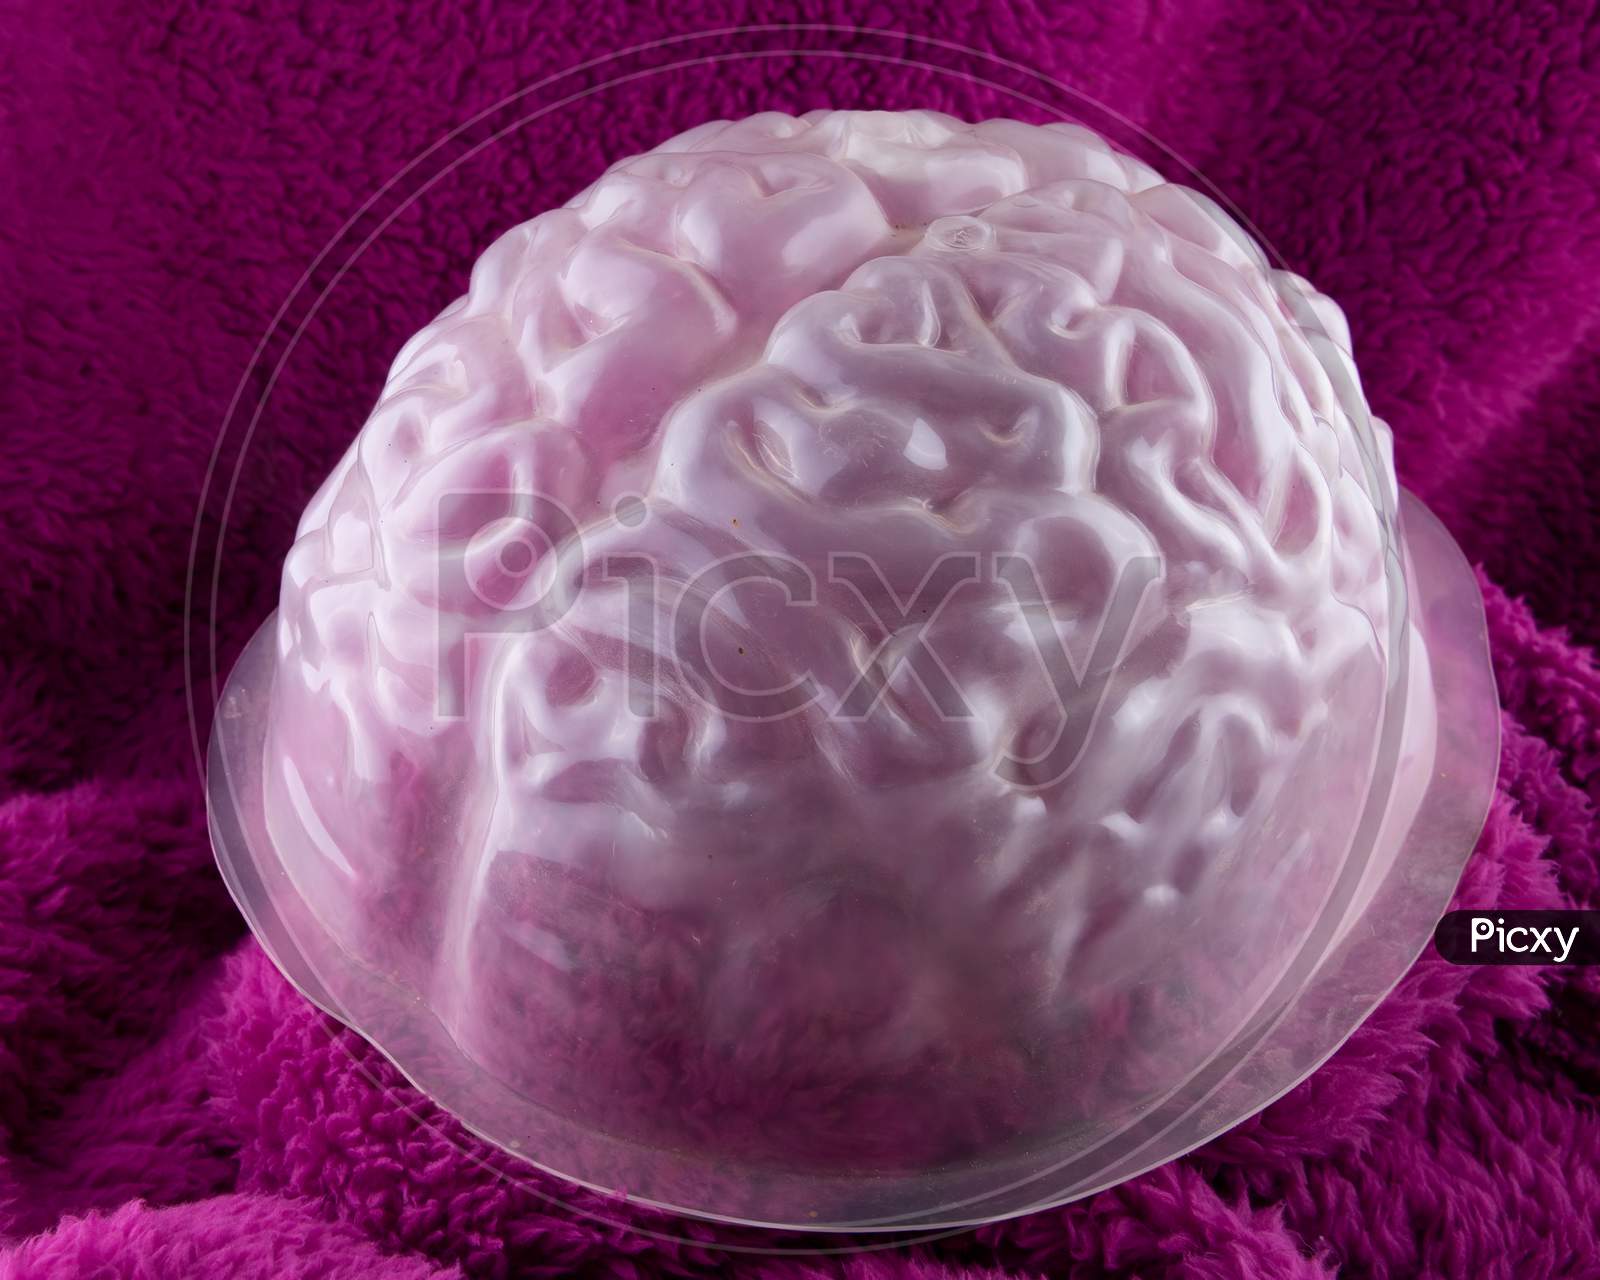 Wrinkled Faux Brain On Fluffy Purple Background. Concept For Halloween Shenanignans.